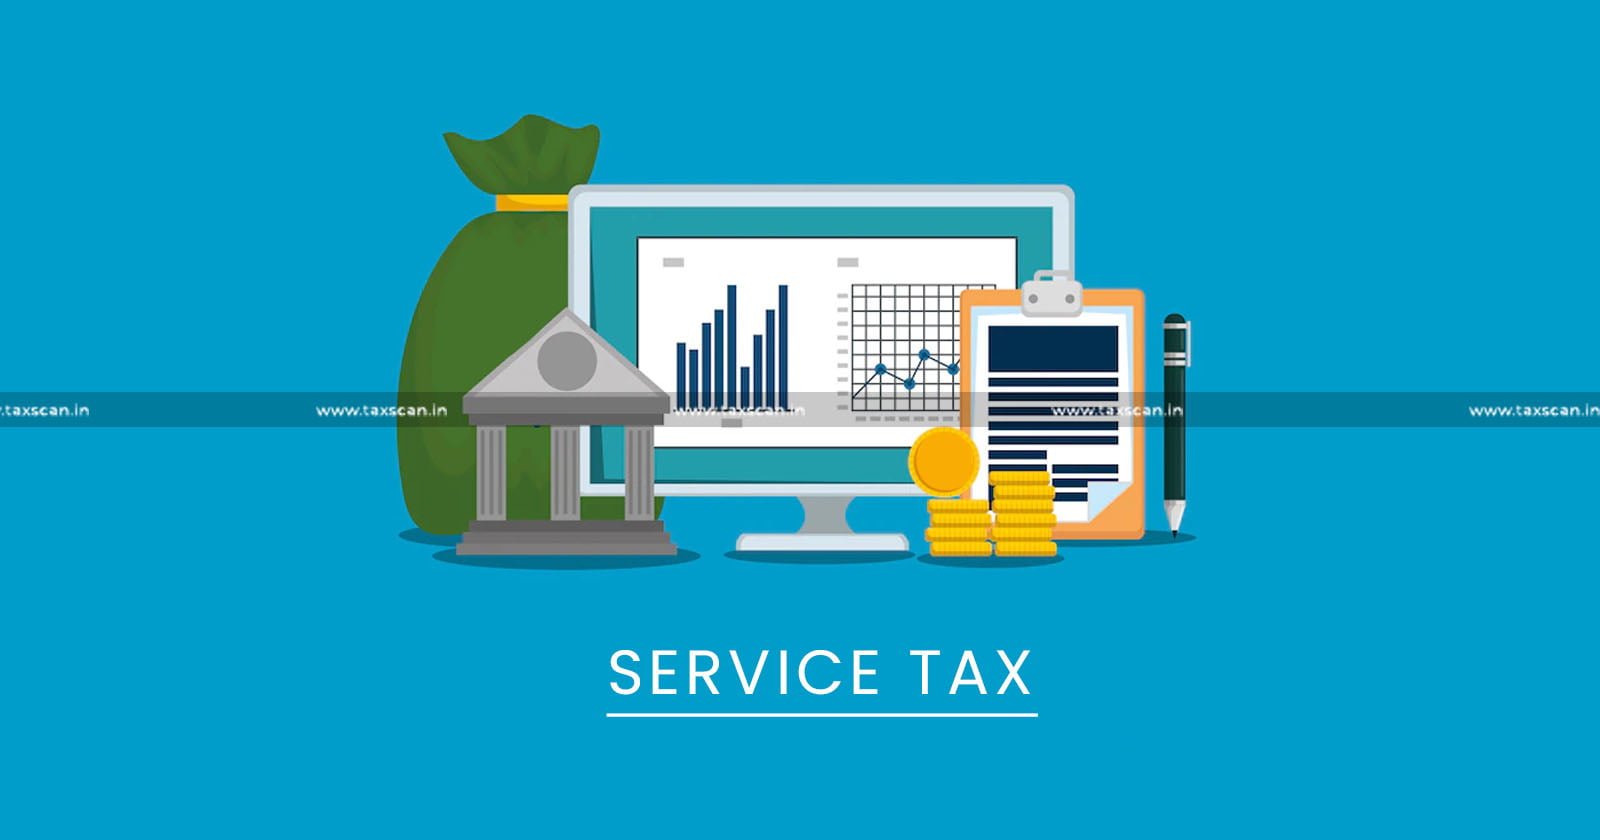 Service Tax - not Payable - Rent received - Immovable Property Service - CESTAT - taxscan